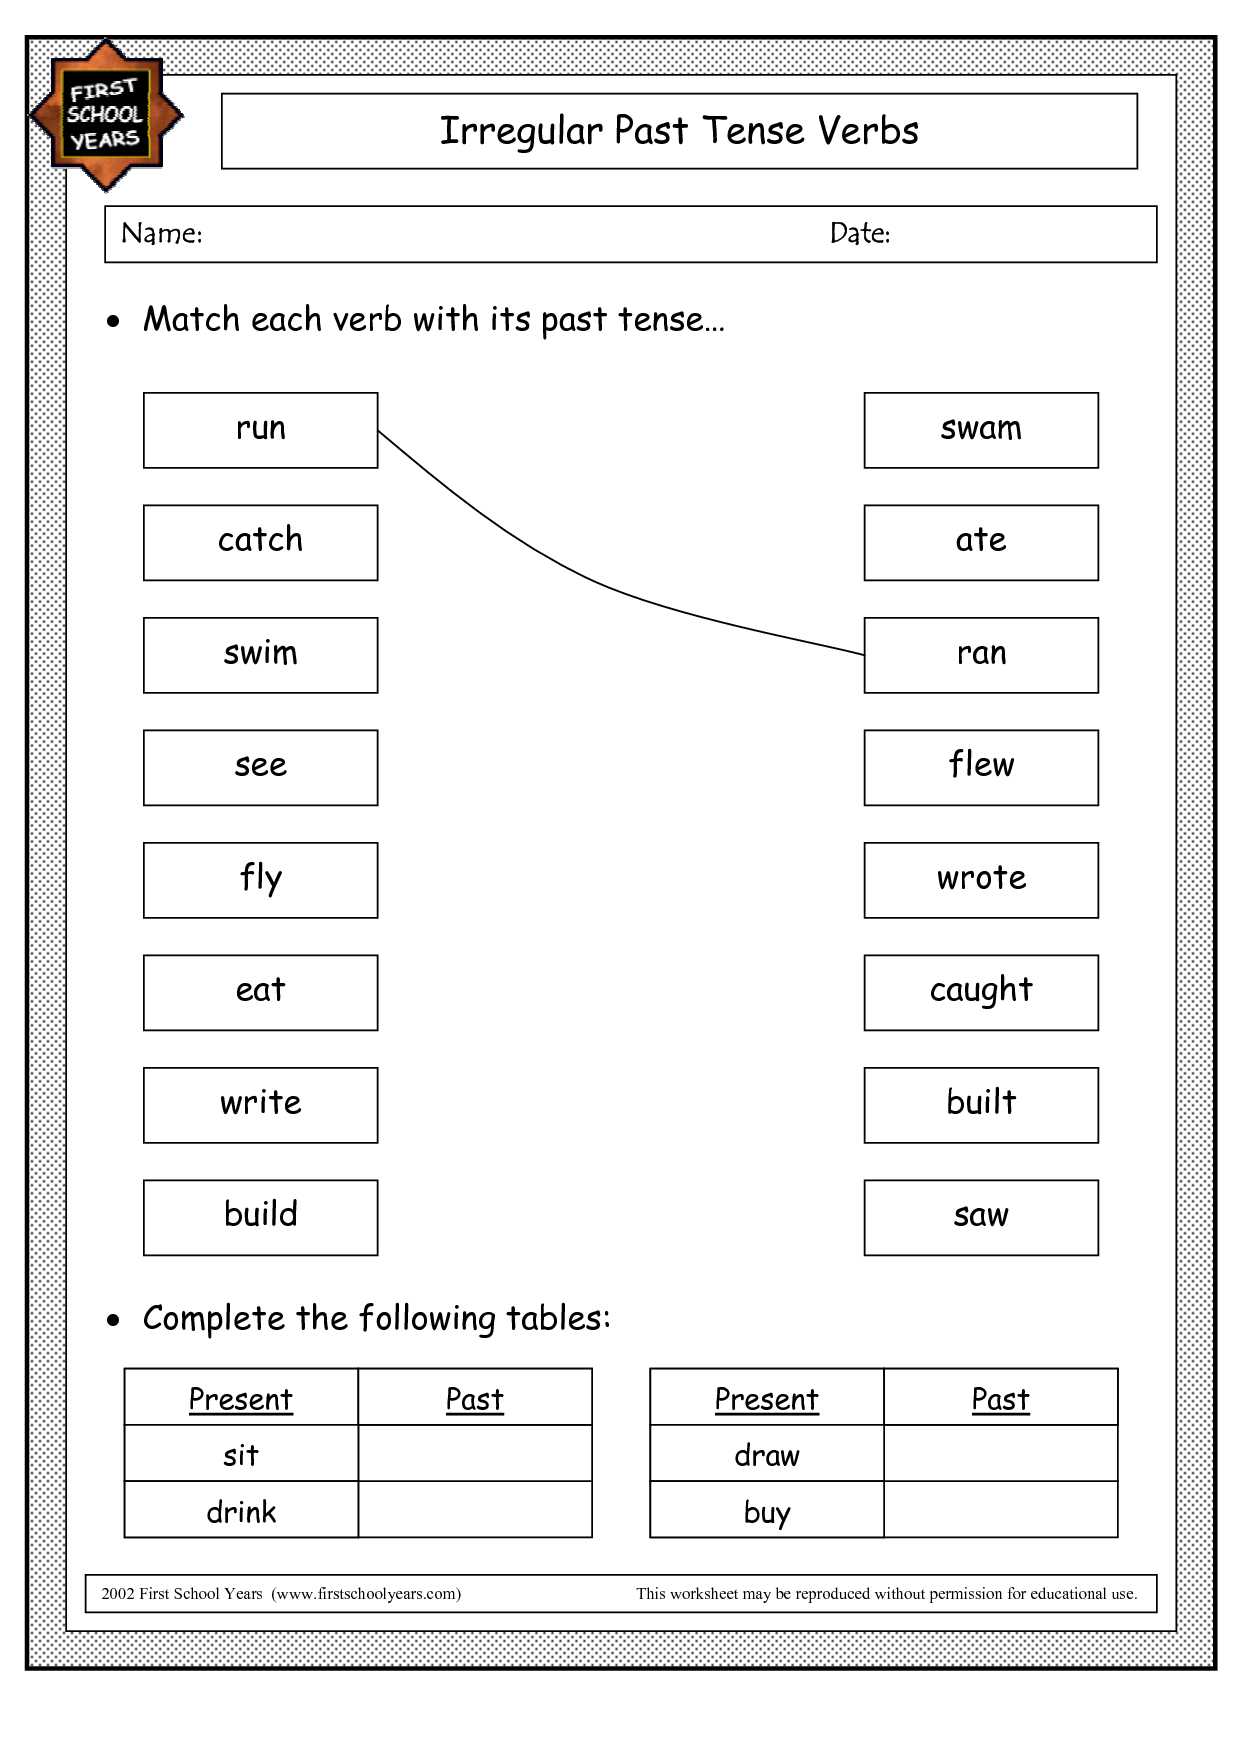 The Imperfect Tense In Spanish Worksheet Answer Key together with Irregular Verbs Worksheets for First Grade